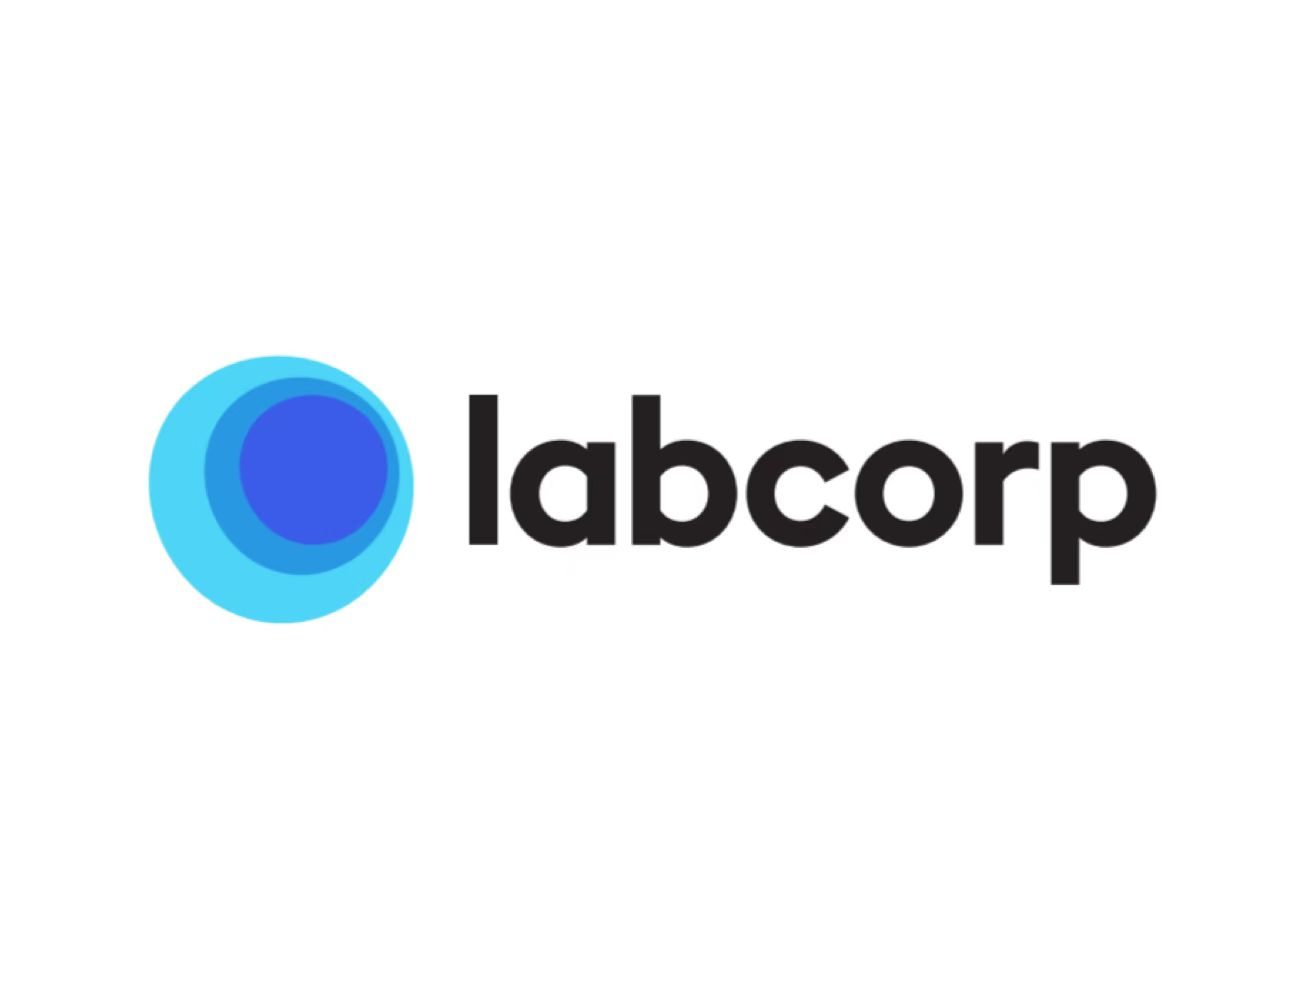 Labcorp Introduces First Trimester Screening Test to Assess Preeclampsia Risk during Pregnancy